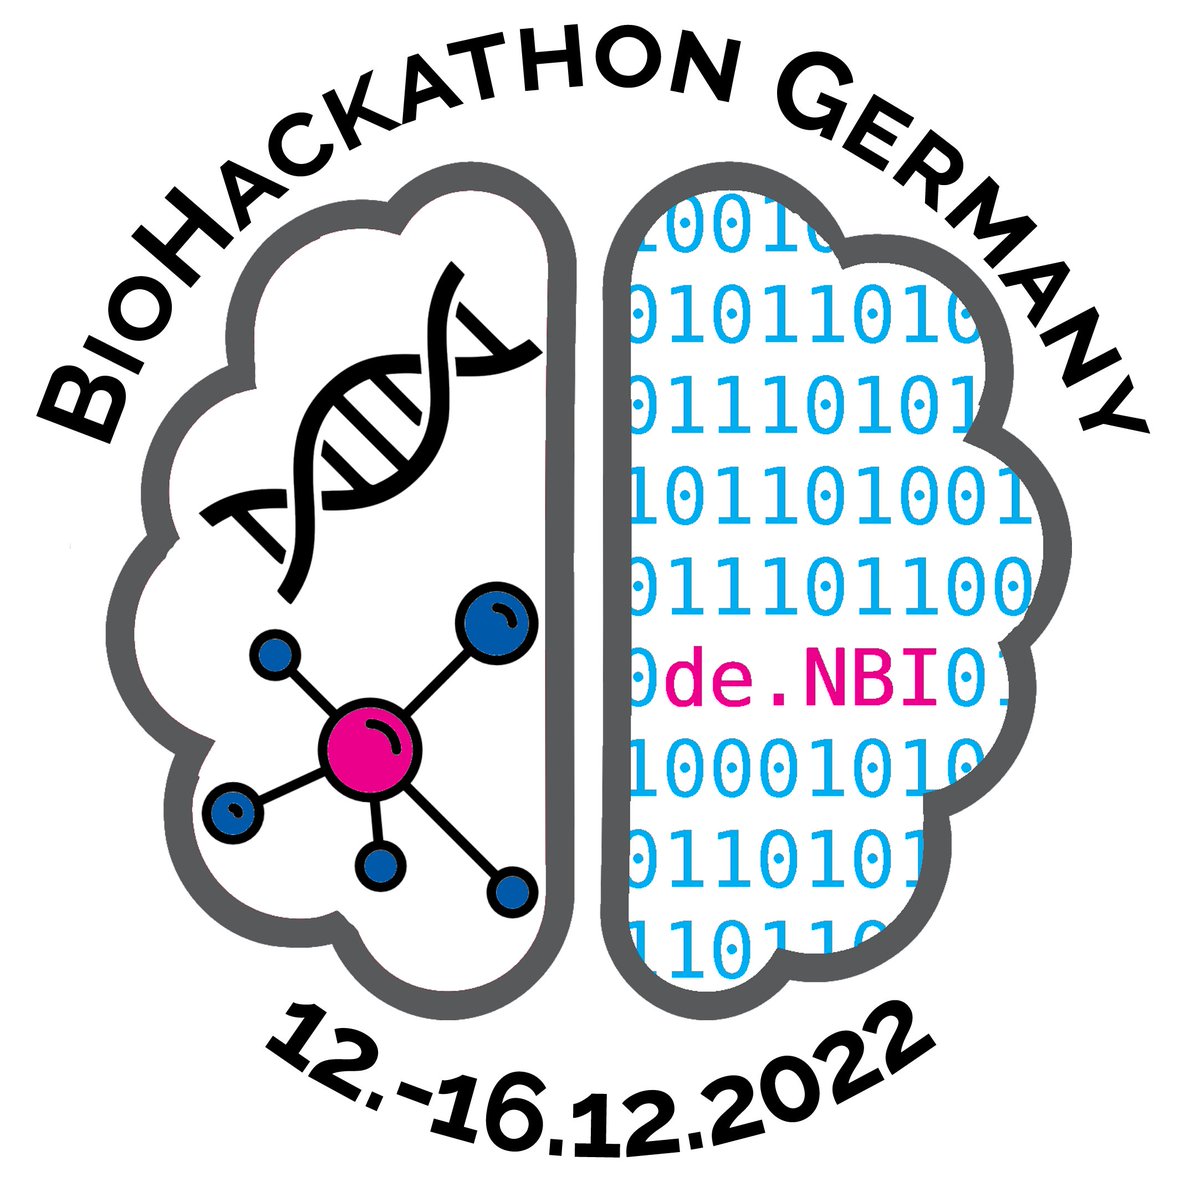 Another @ISBSIB project at BioHackathon Germany: @uniqueG24 will offer the project @ELIXIREurope @GA4GH #cloud. For more information see: denbi.de/de-nbi-events/…